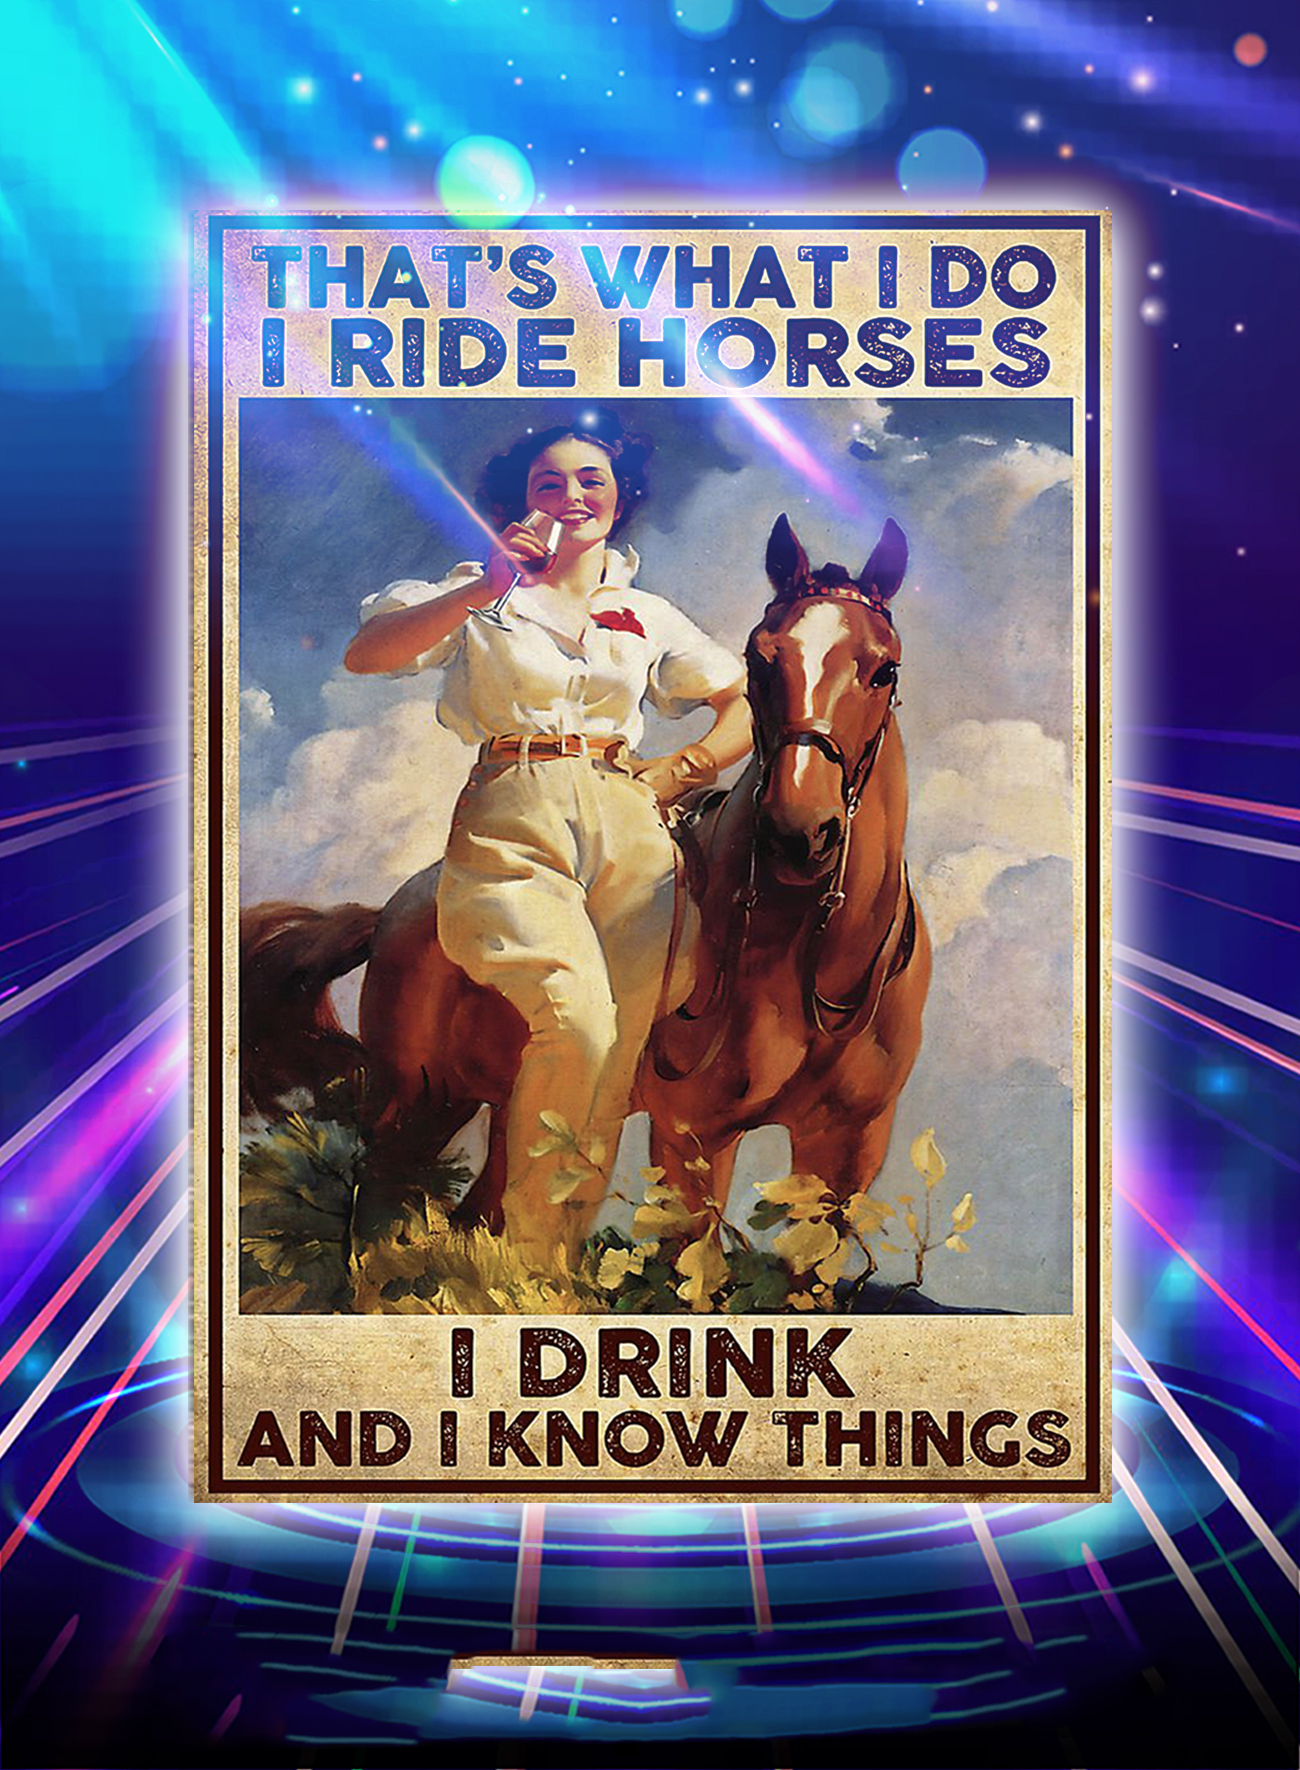 Girl that's what i do i ride horses i drink and i know things poster - A1